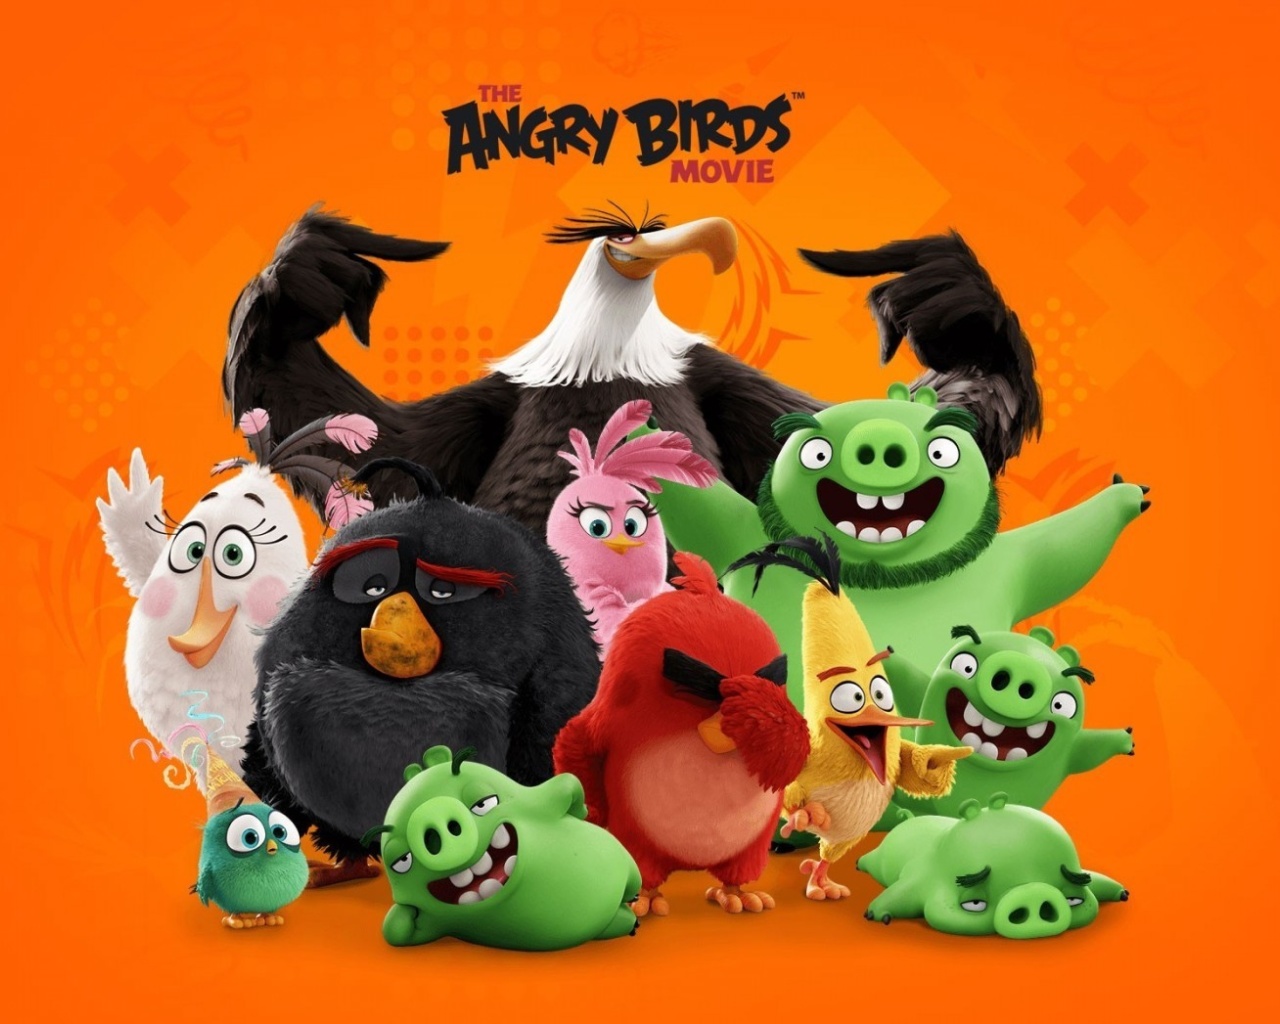 Das Angry Birds the Movie Release by Rovio Wallpaper 1280x1024